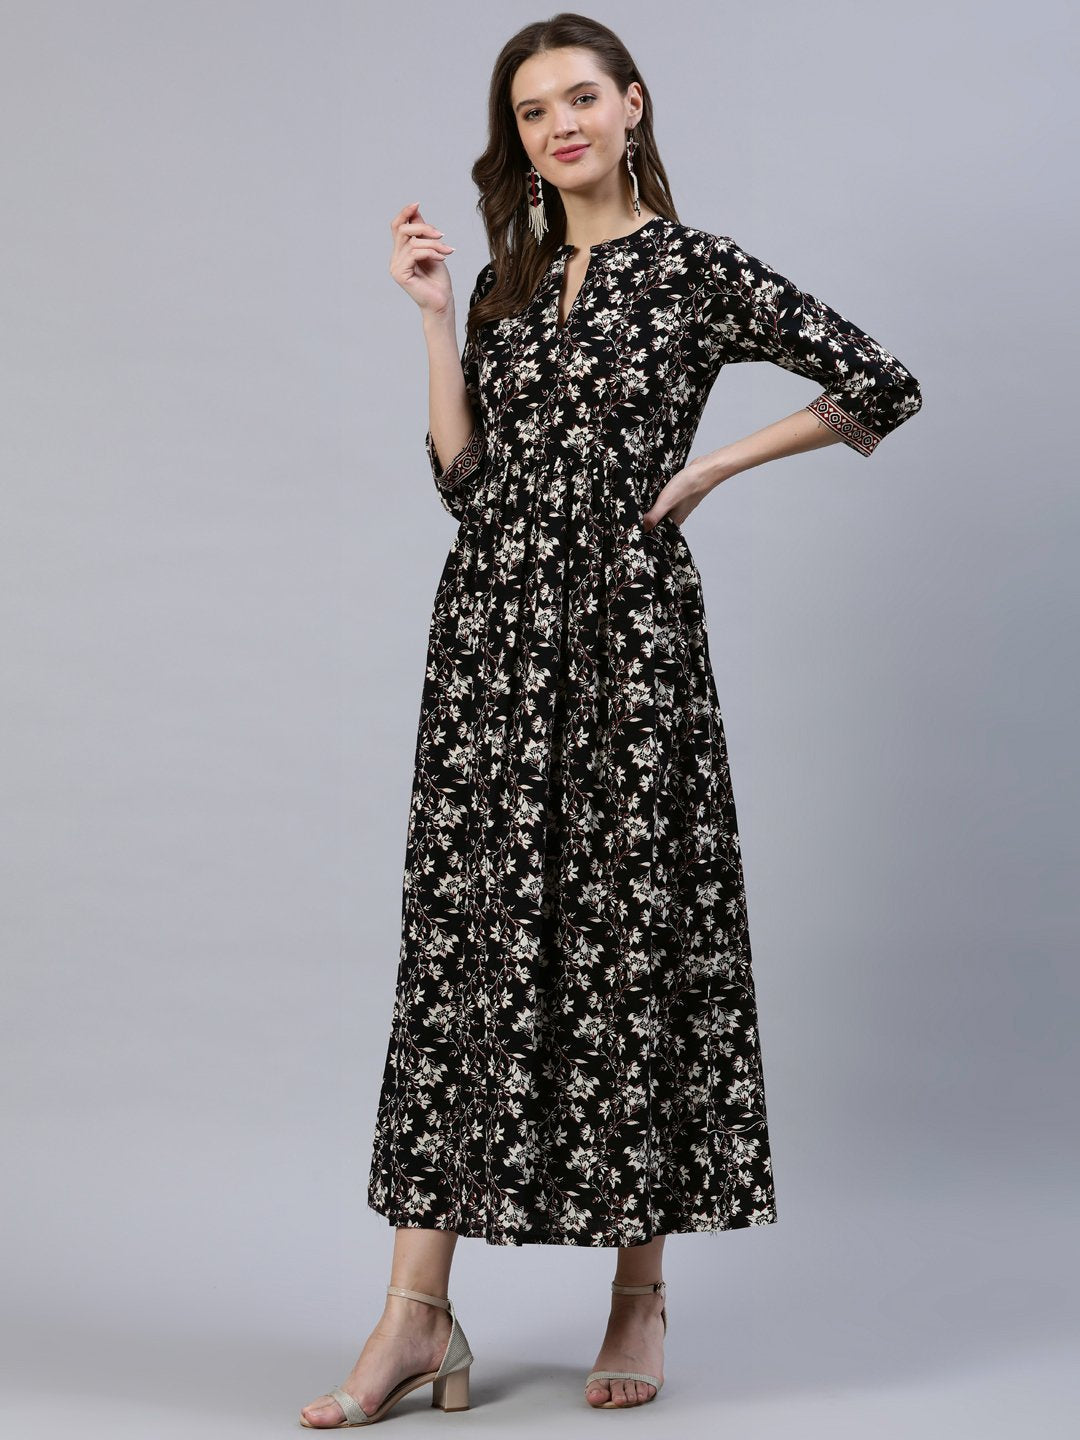 Women's Black Floral Printed Dress With Three Quarter Sleeves - Nayo Clothing